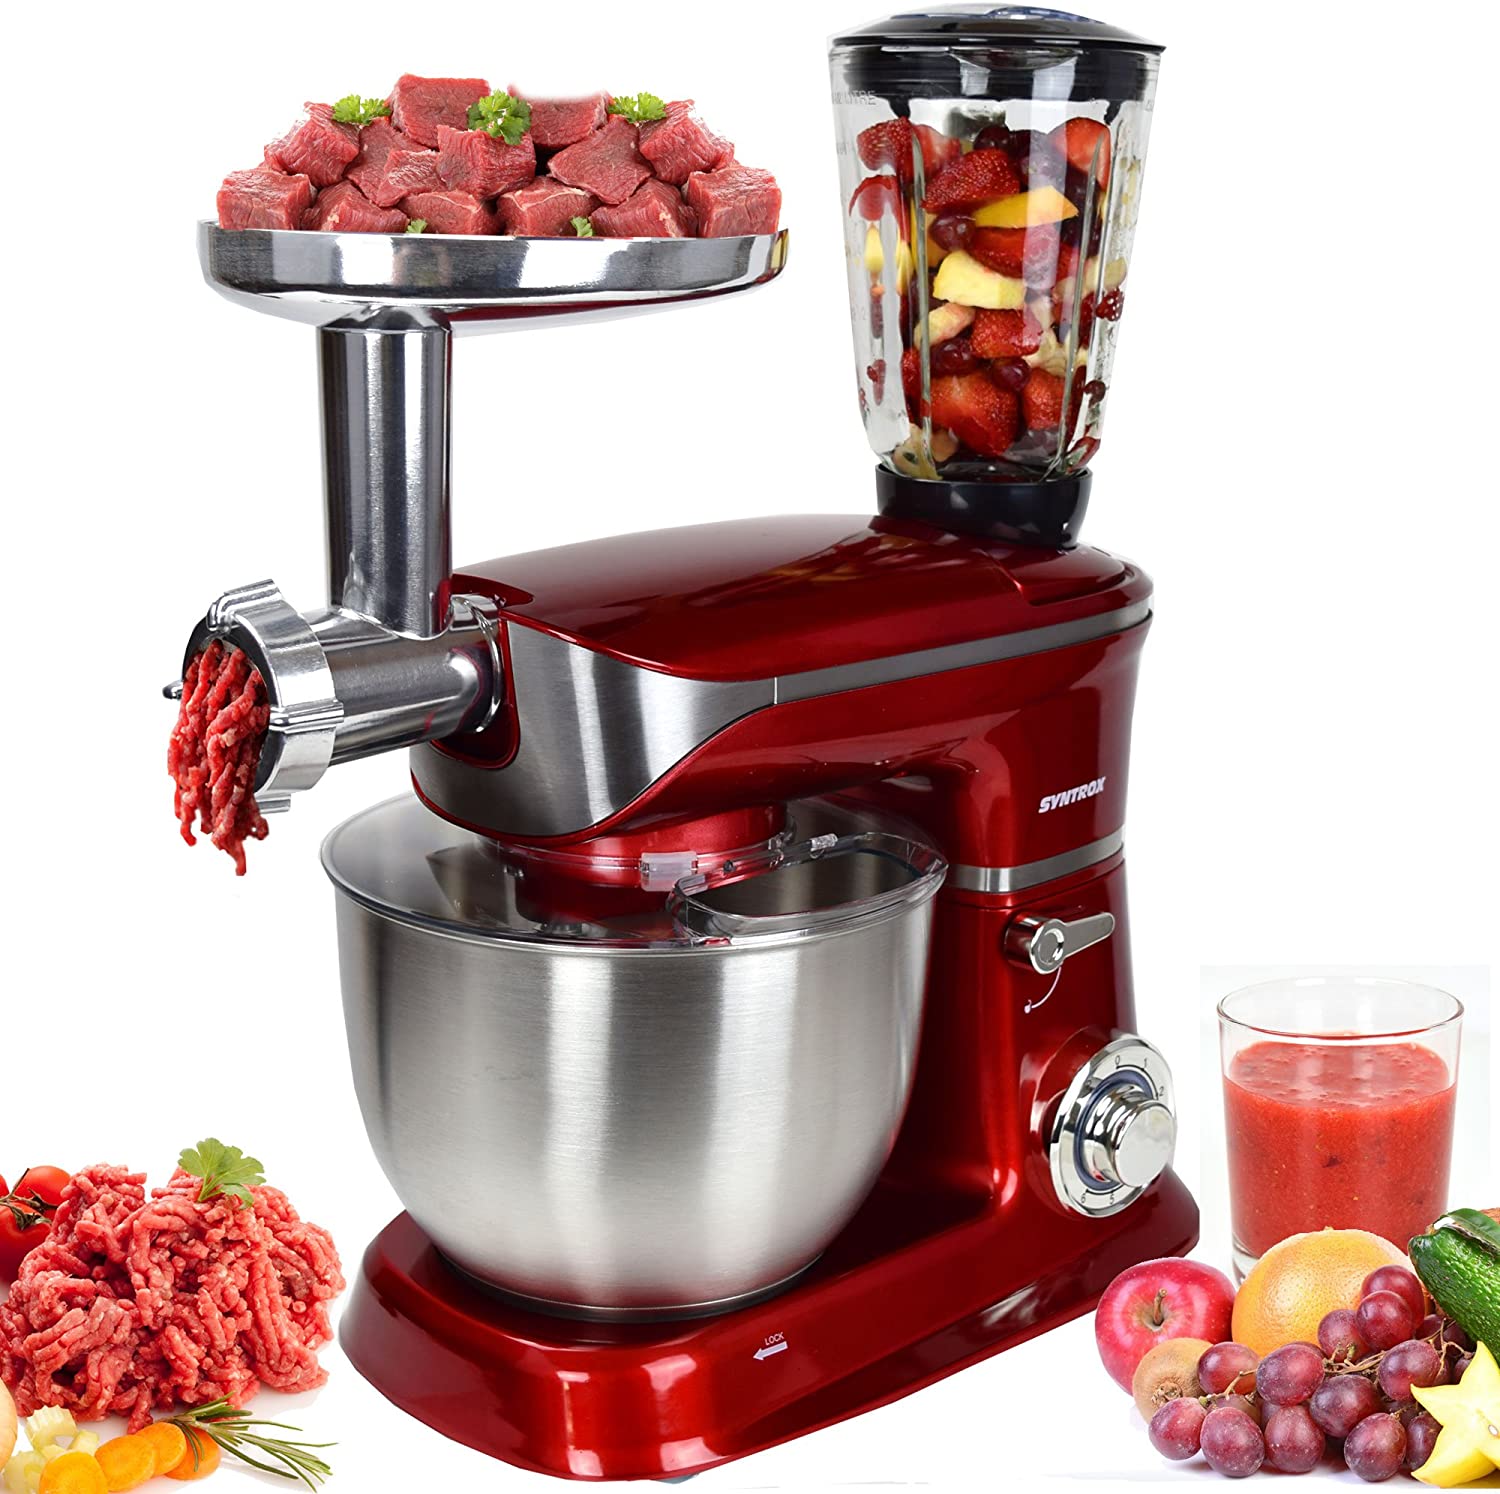 Syntrox Germany KM-6.5L De Luxe Red Food Processor Kneading Machine Mixer Stainless Steel Red 1300 Watt with Great Accessories